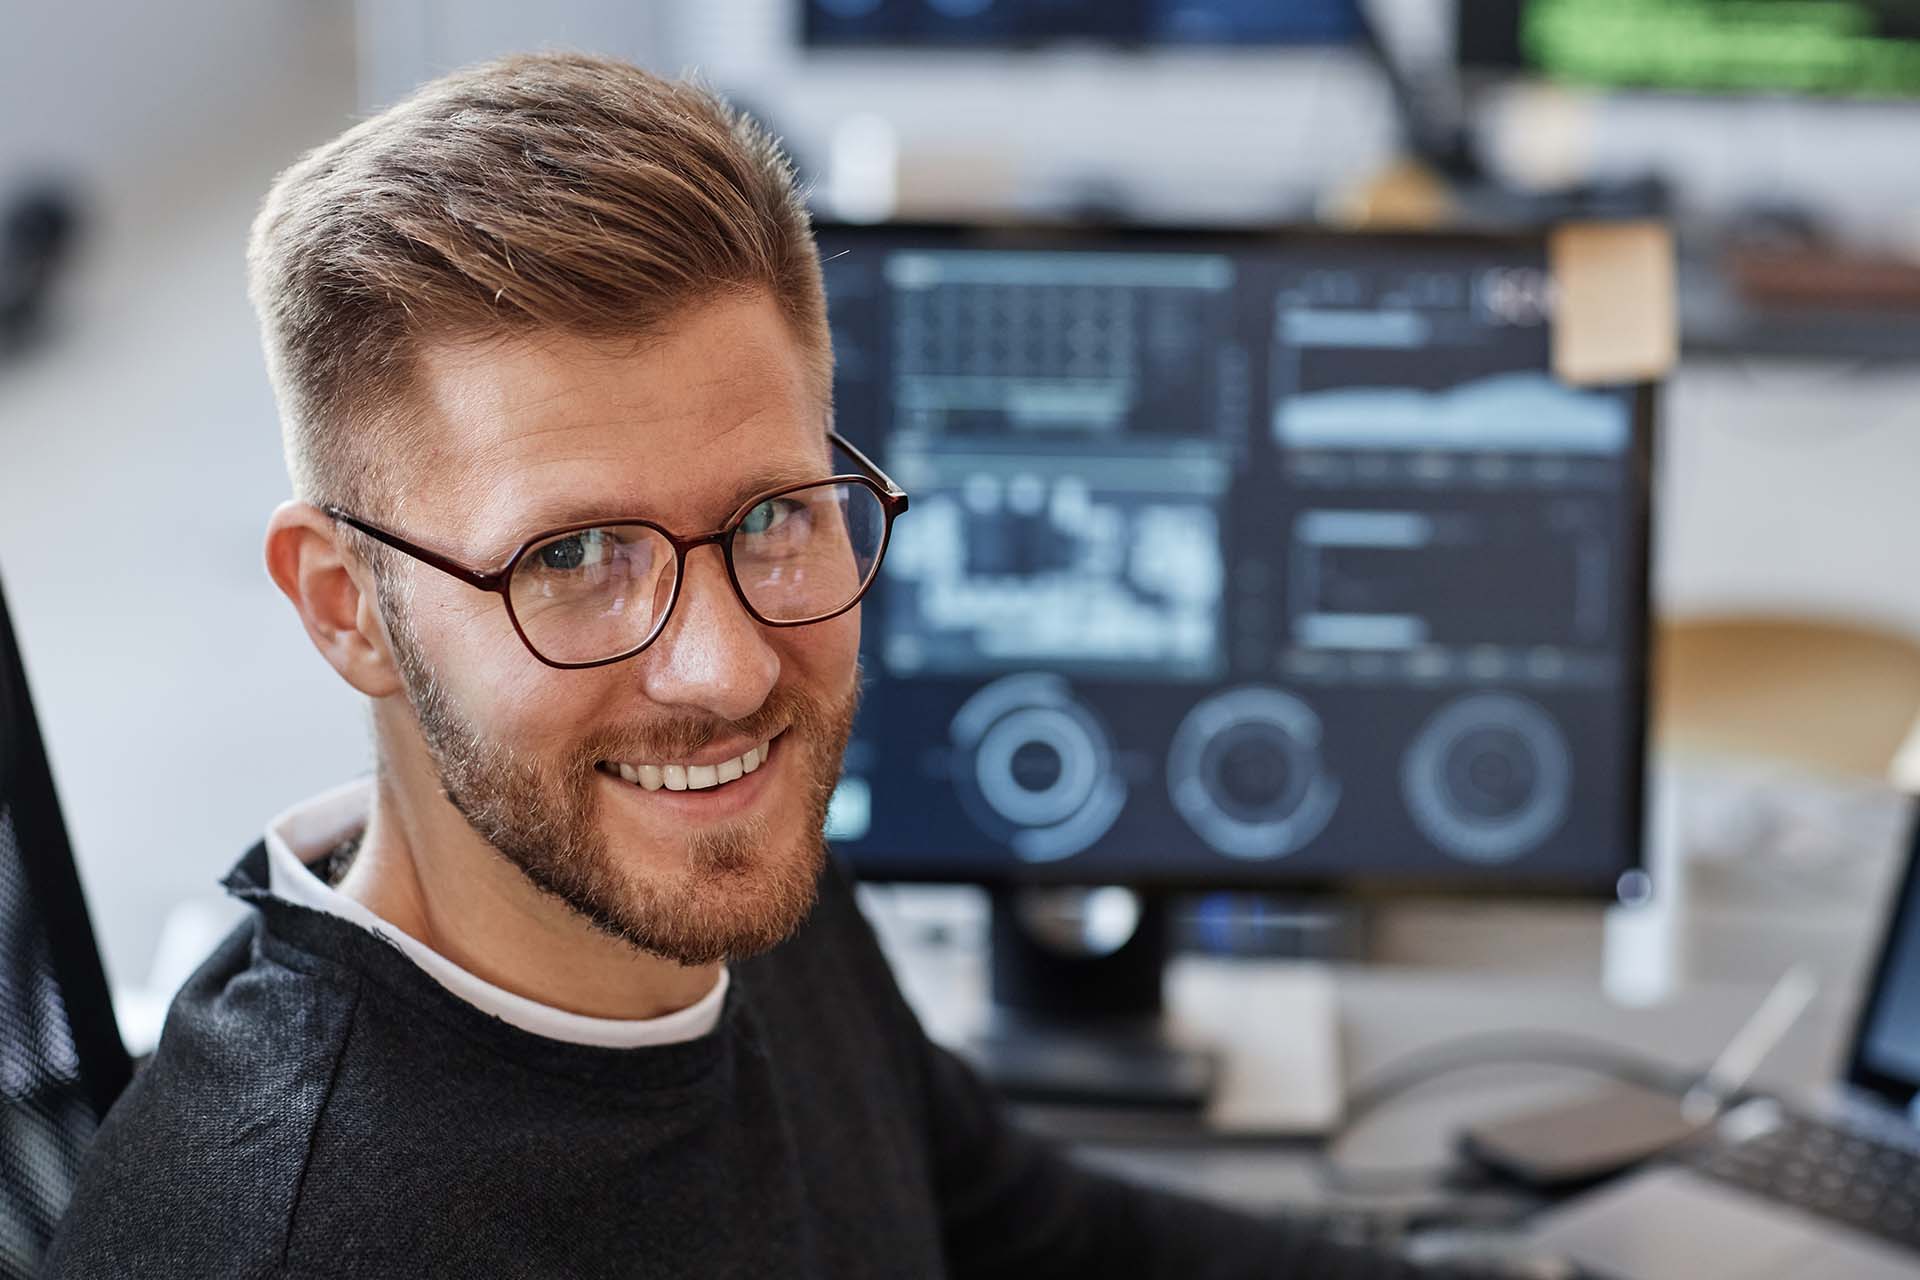 A bespectacled man smiles at the camera with a screen showing analytics in the background